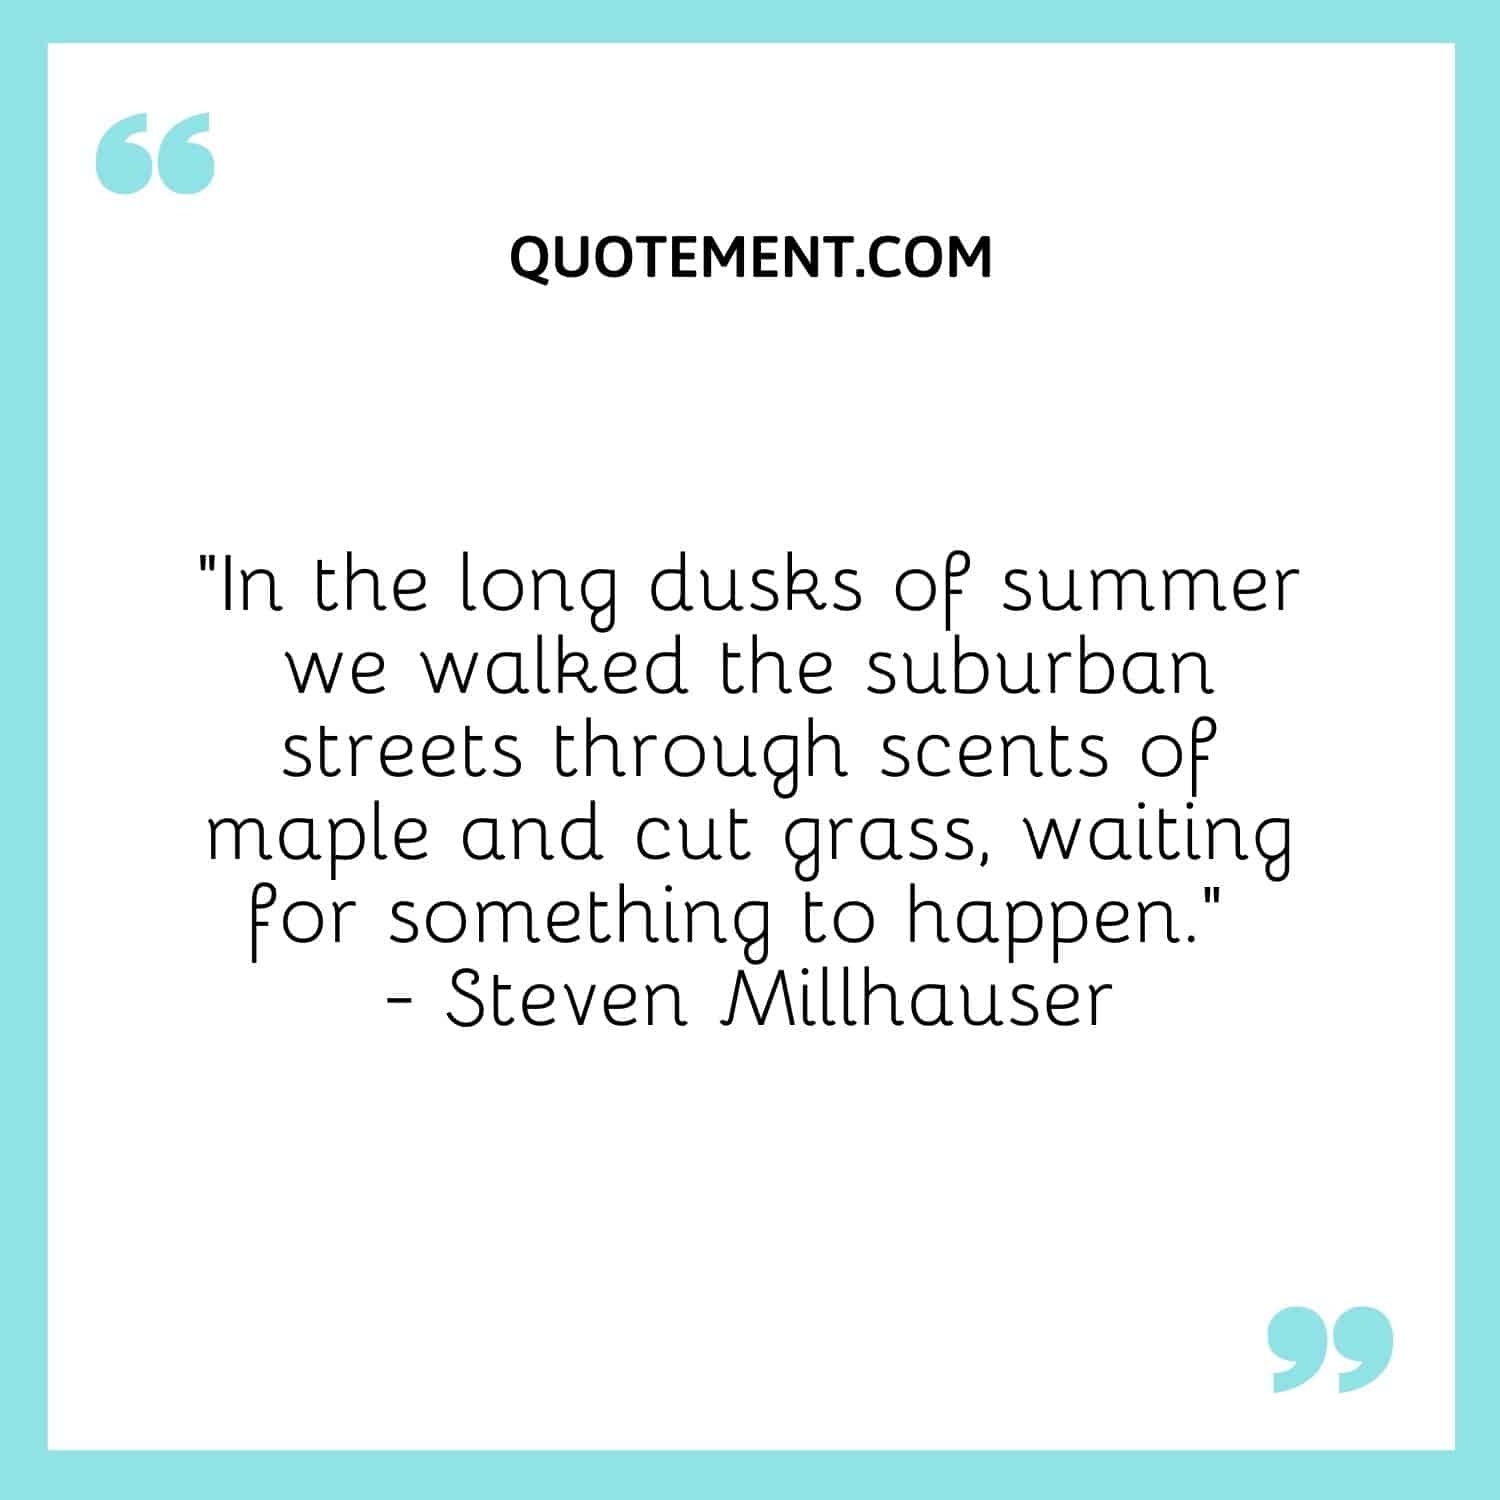 In the long dusks of summer we walked the suburban streets through scents of maple and cut grass, waiting for something to happen. – Steven Millhauser